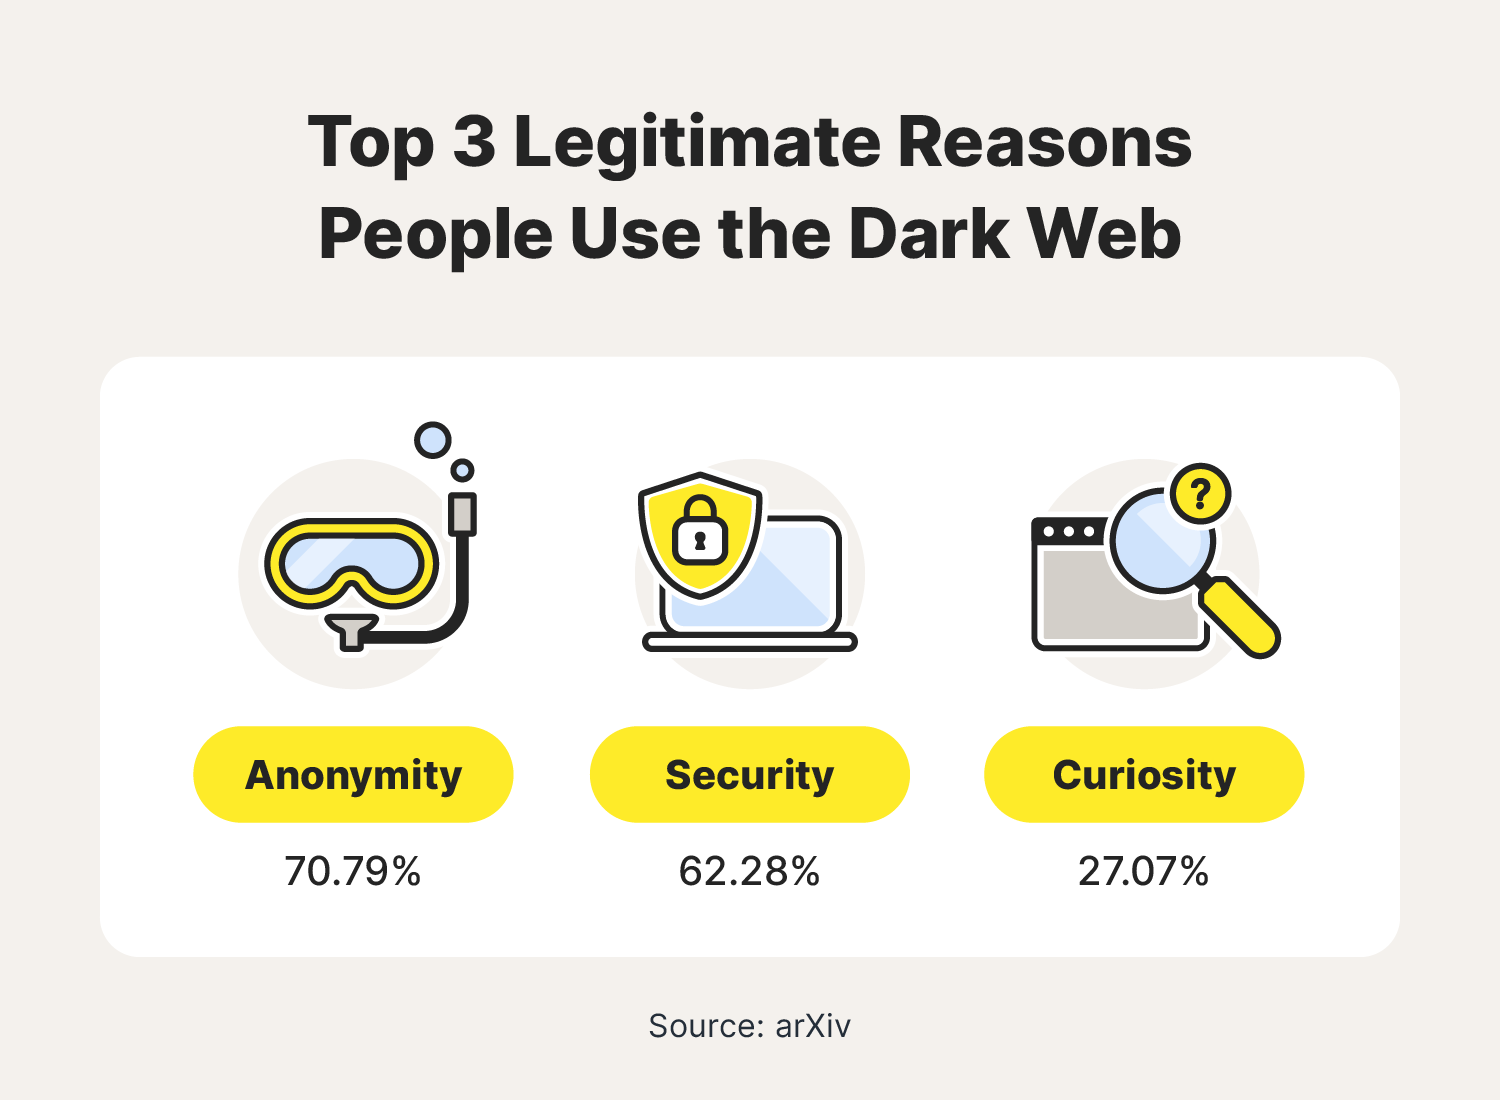 The top 3 legitimate reasons people use the dark web are anonymity, security, and curiosity.